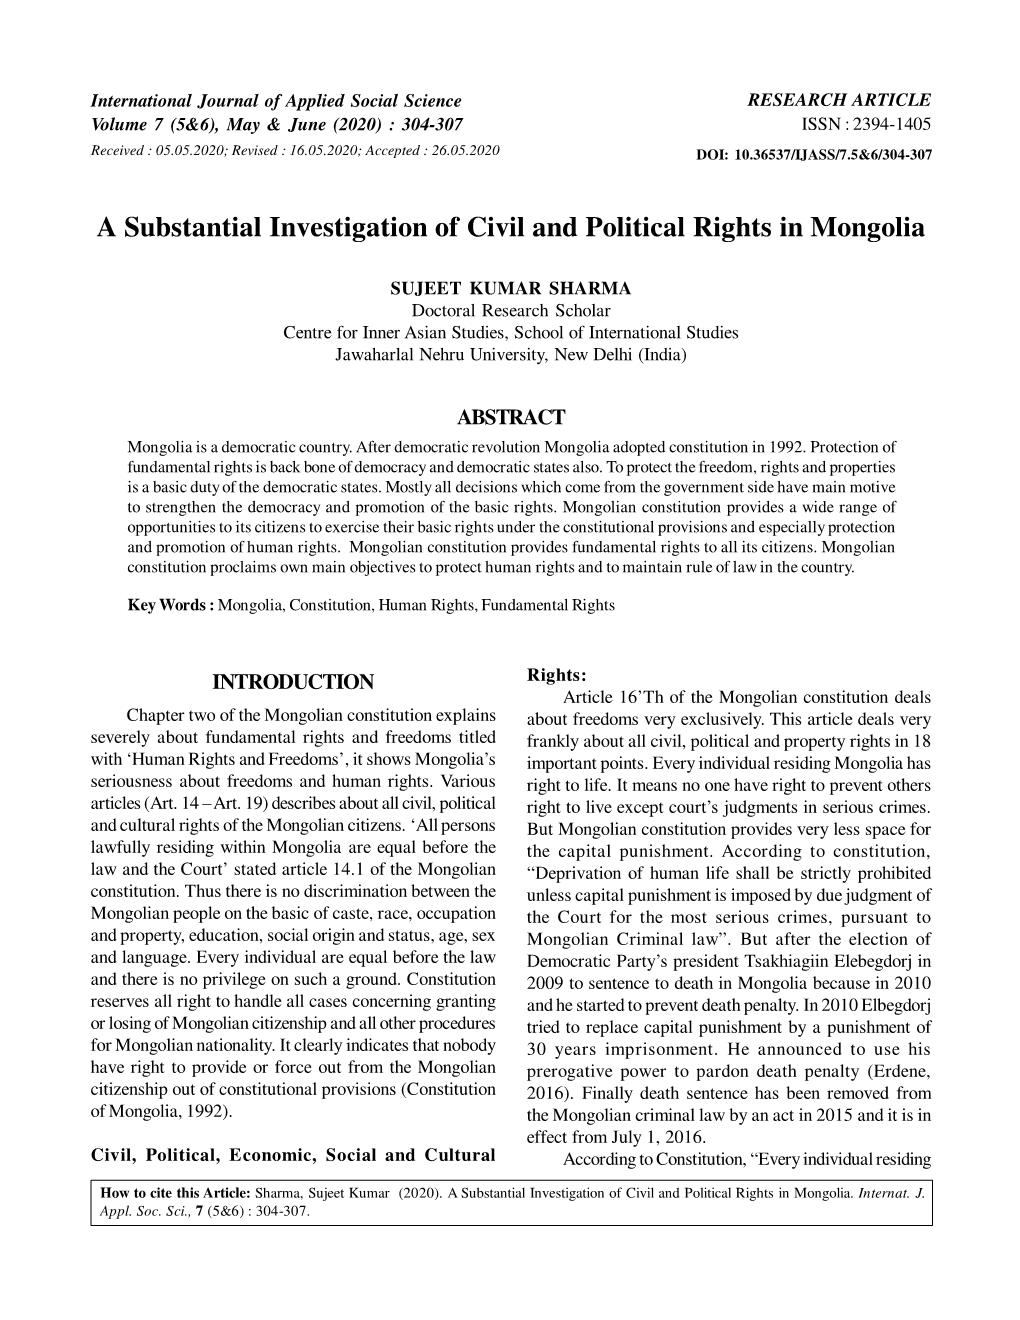 A Substantial Investigation of Civil and Political Rights in Mongolia